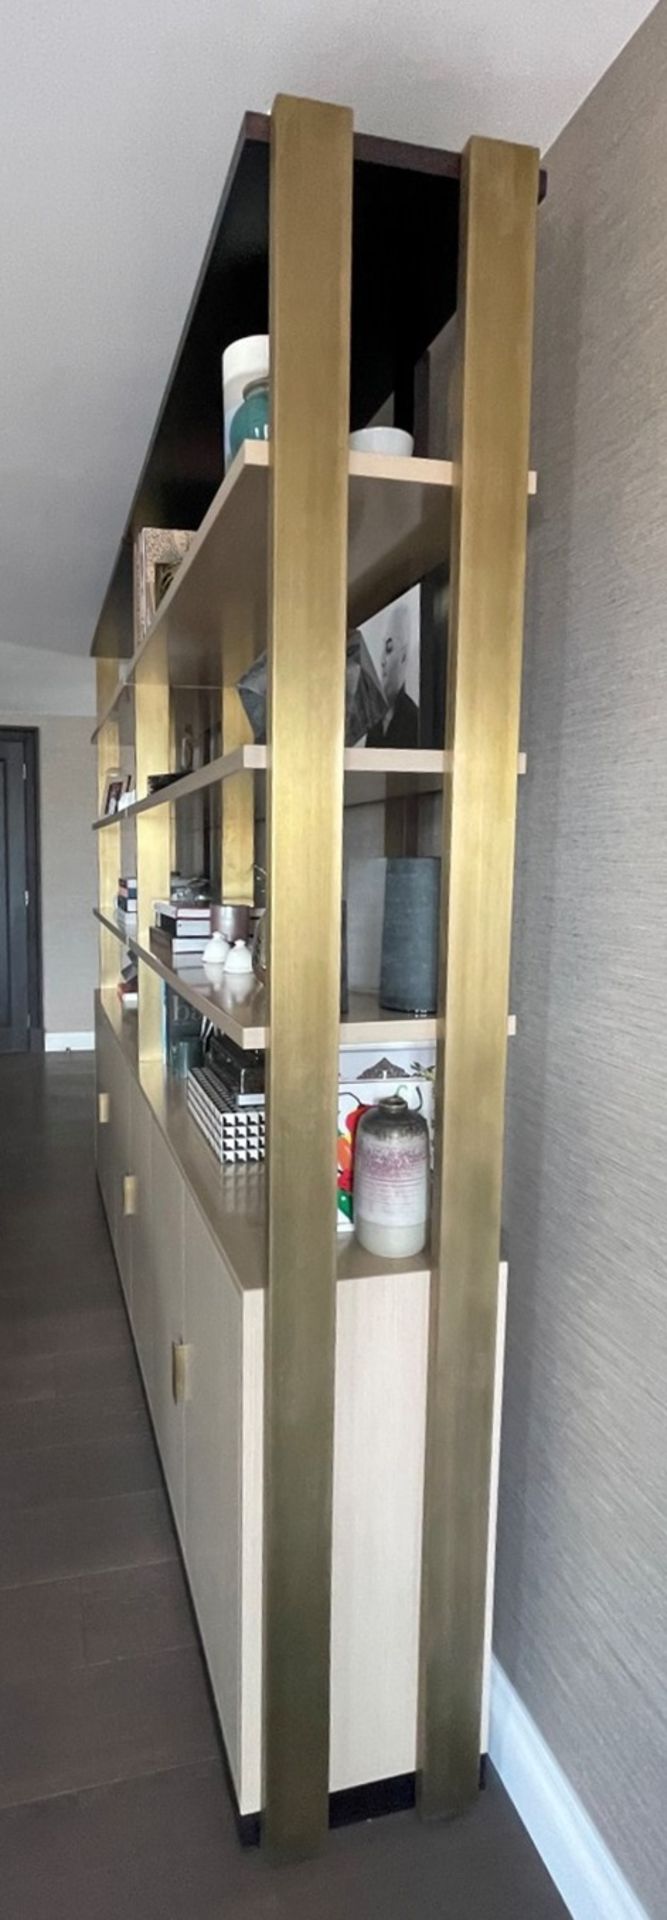 1 x Large 3-Metre Wide Designer Display and Storage Unit With A Limed Oak Finish And Brass Details - Image 9 of 16